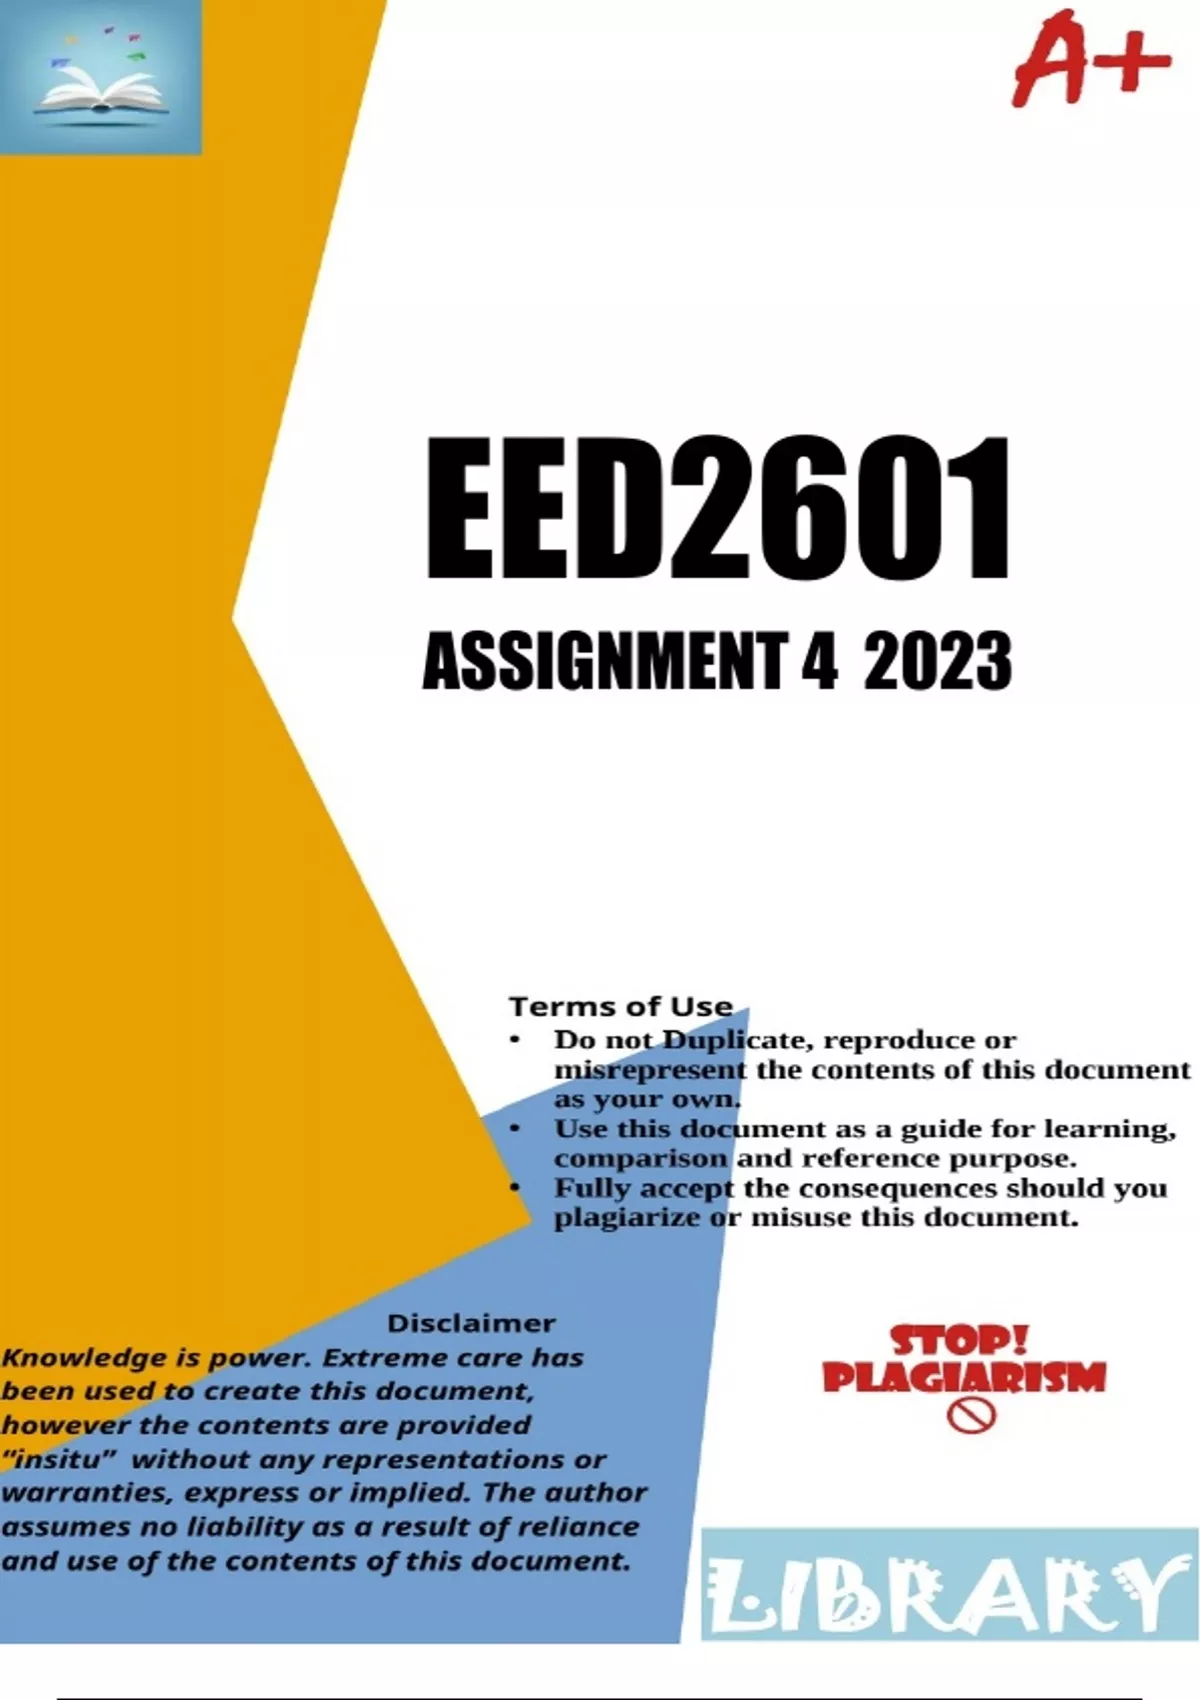 eed2601 assignment 4 answers 2023